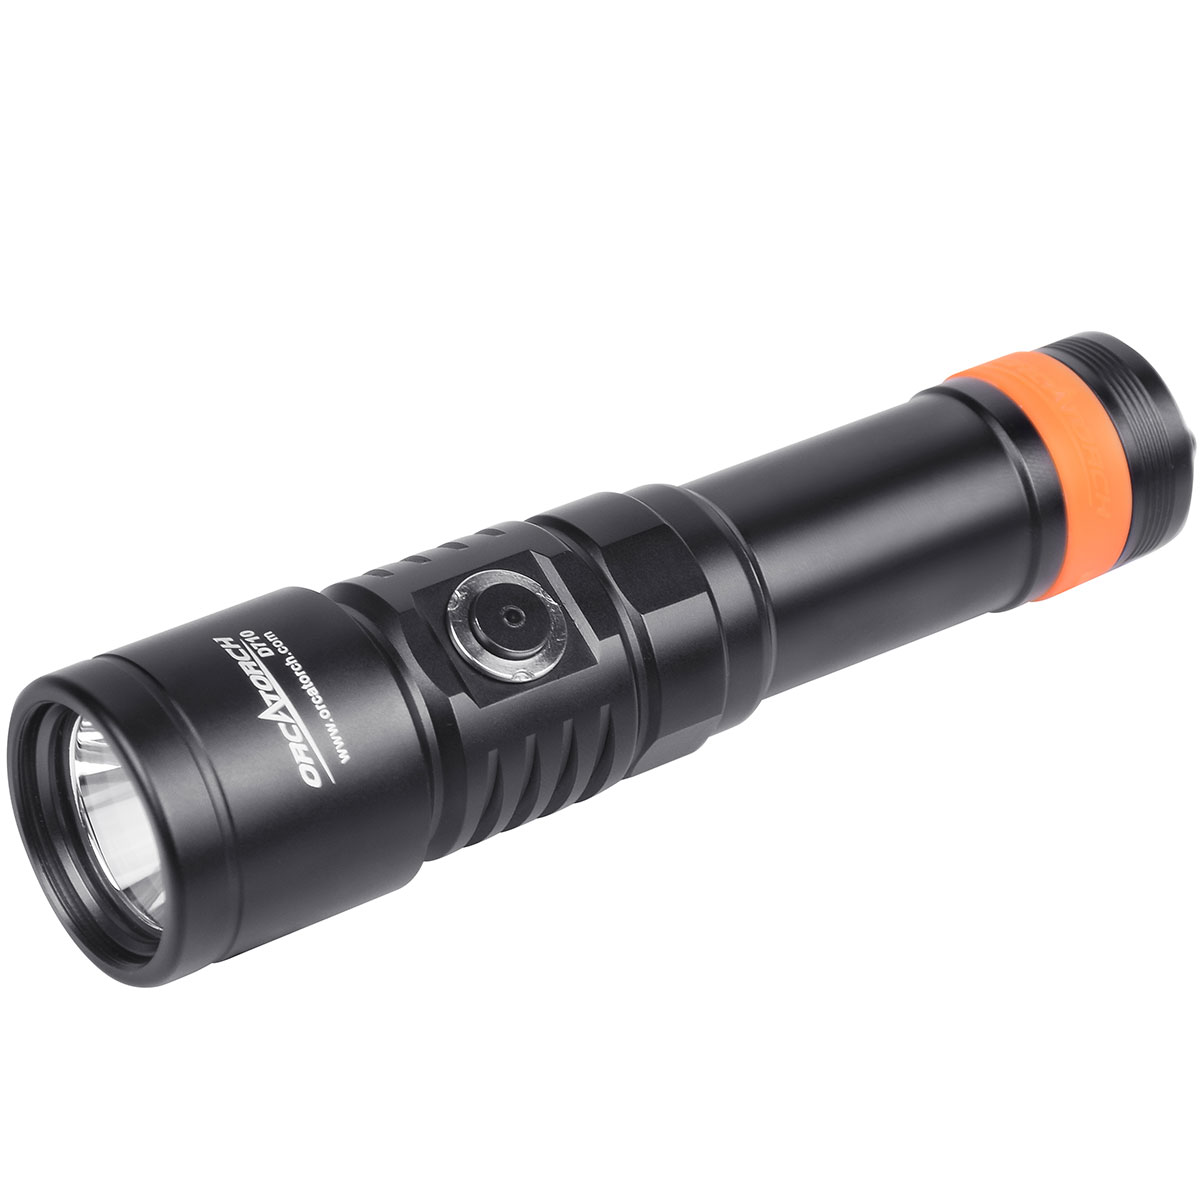 The best dive light overall